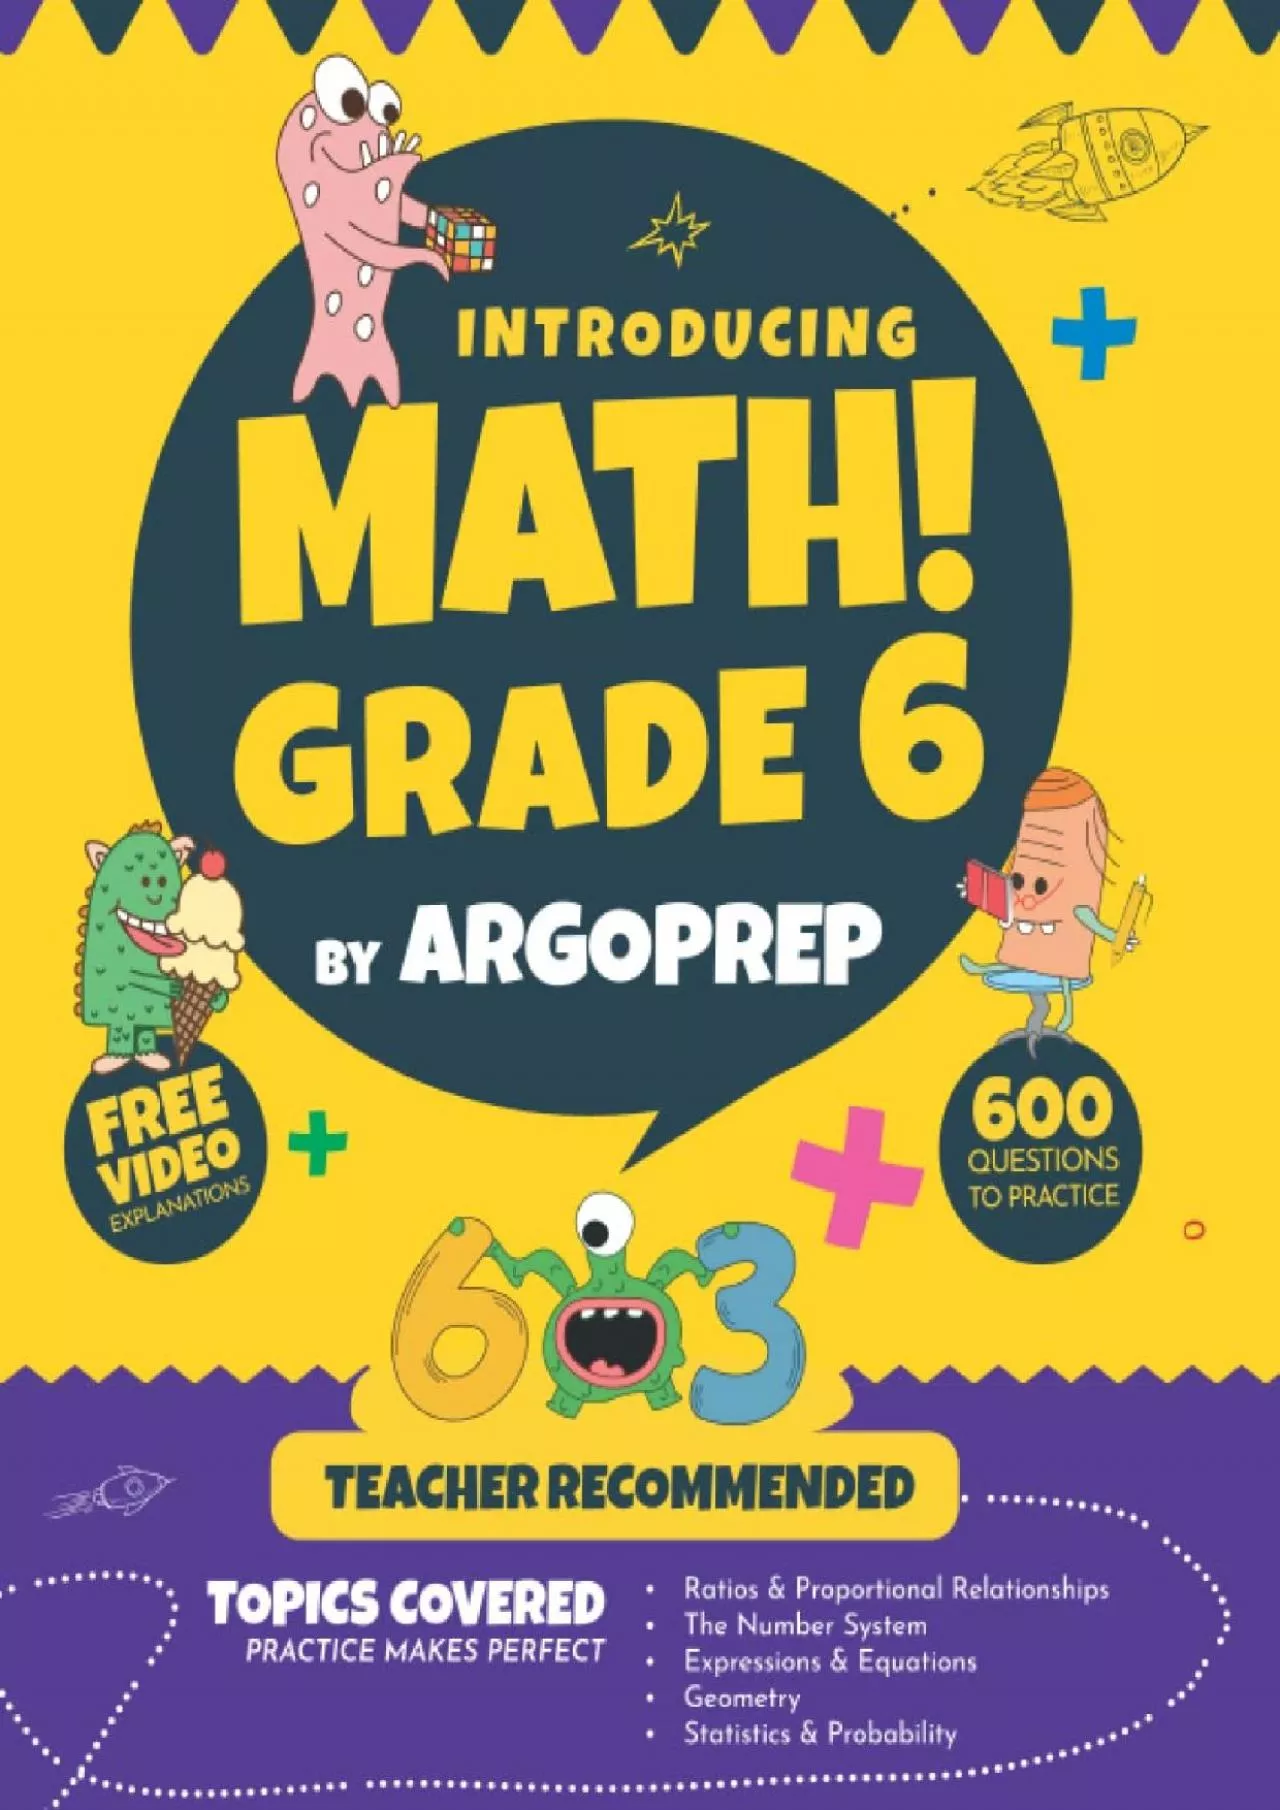 [DOWNLOAD] Introducing MATH Grade 6 by ArgoPrep: 600+ Practice Questions + Comprehensive